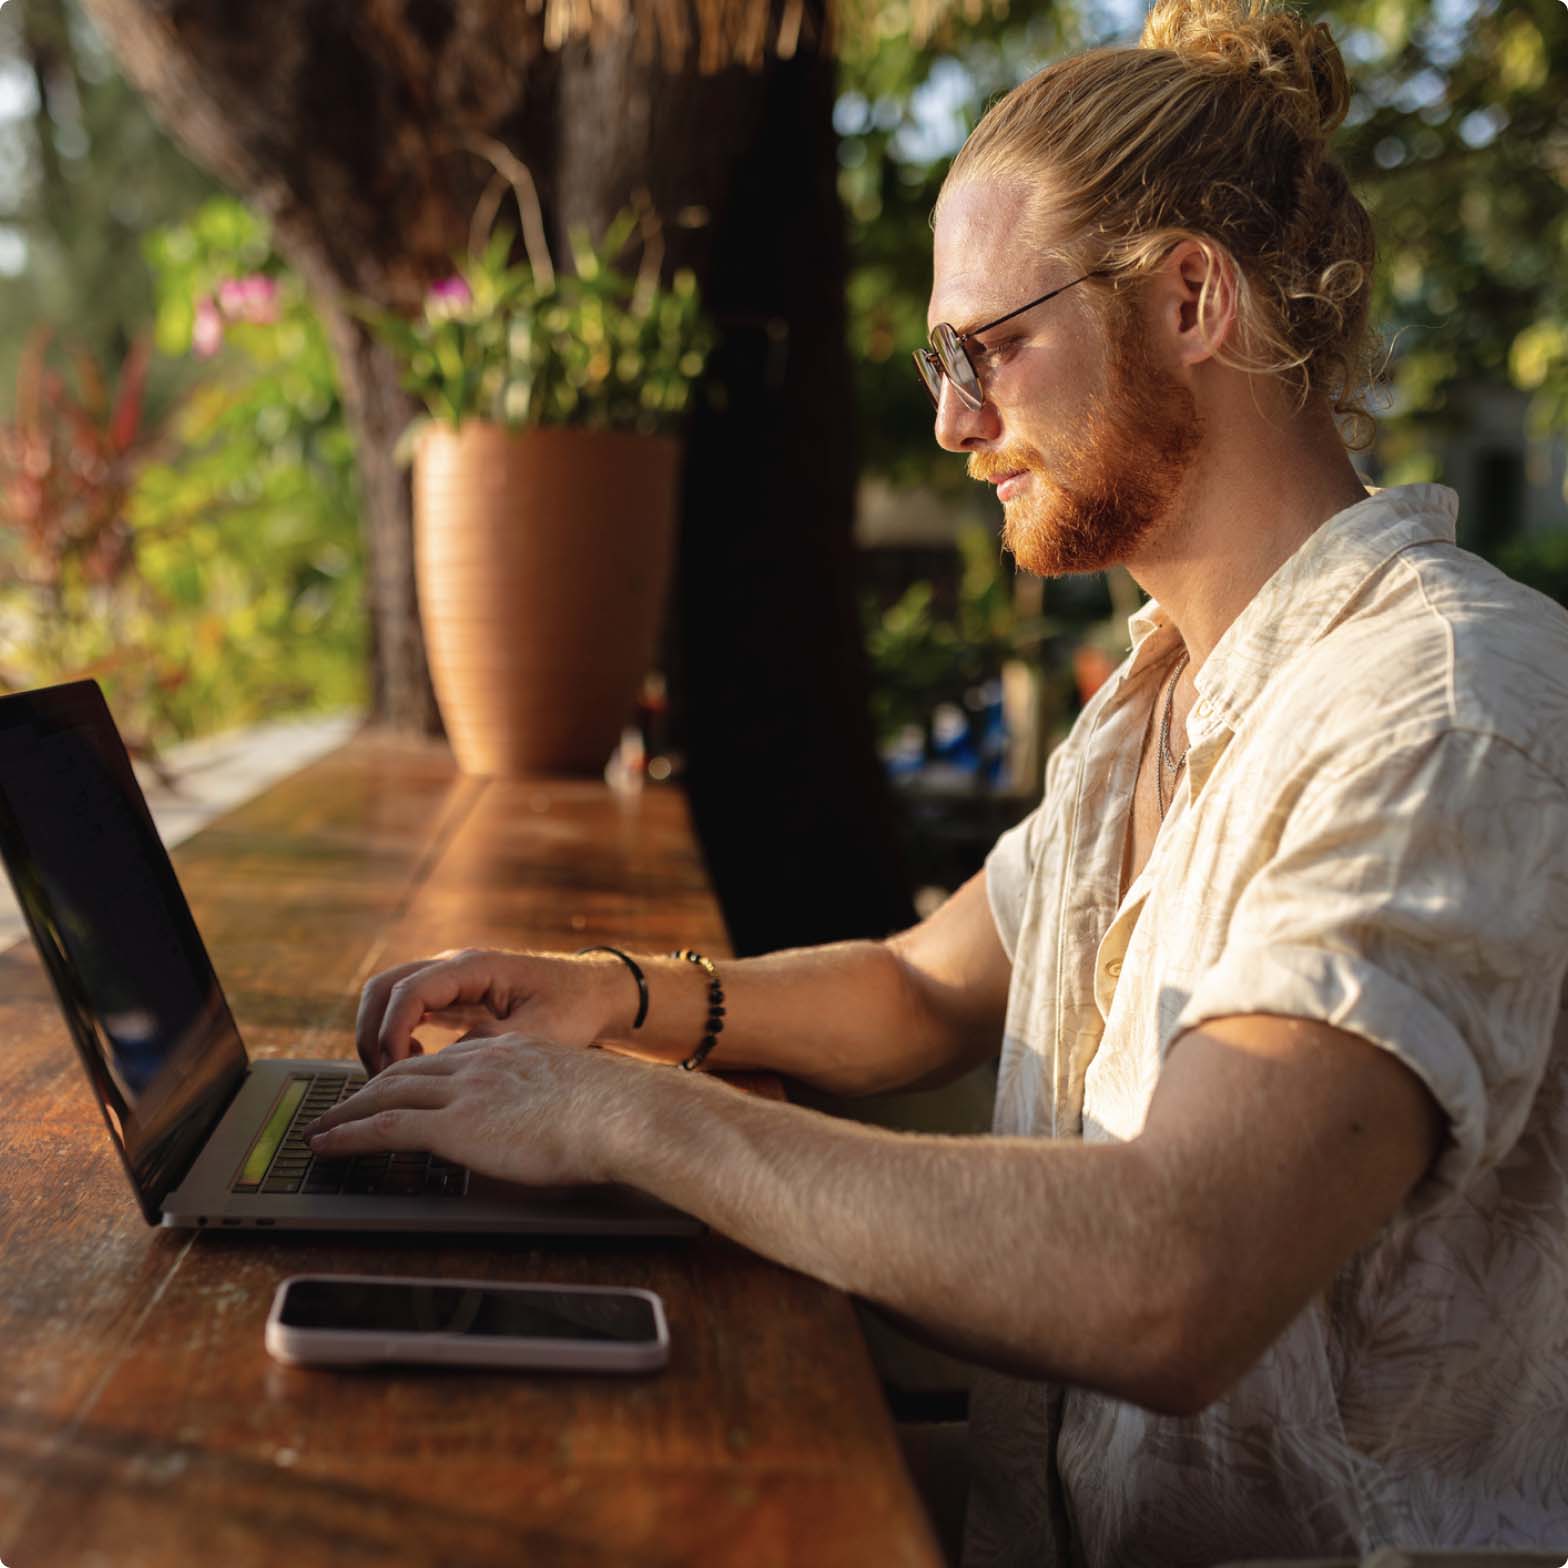 A man sitting at an outdoor cafe working on a laptop